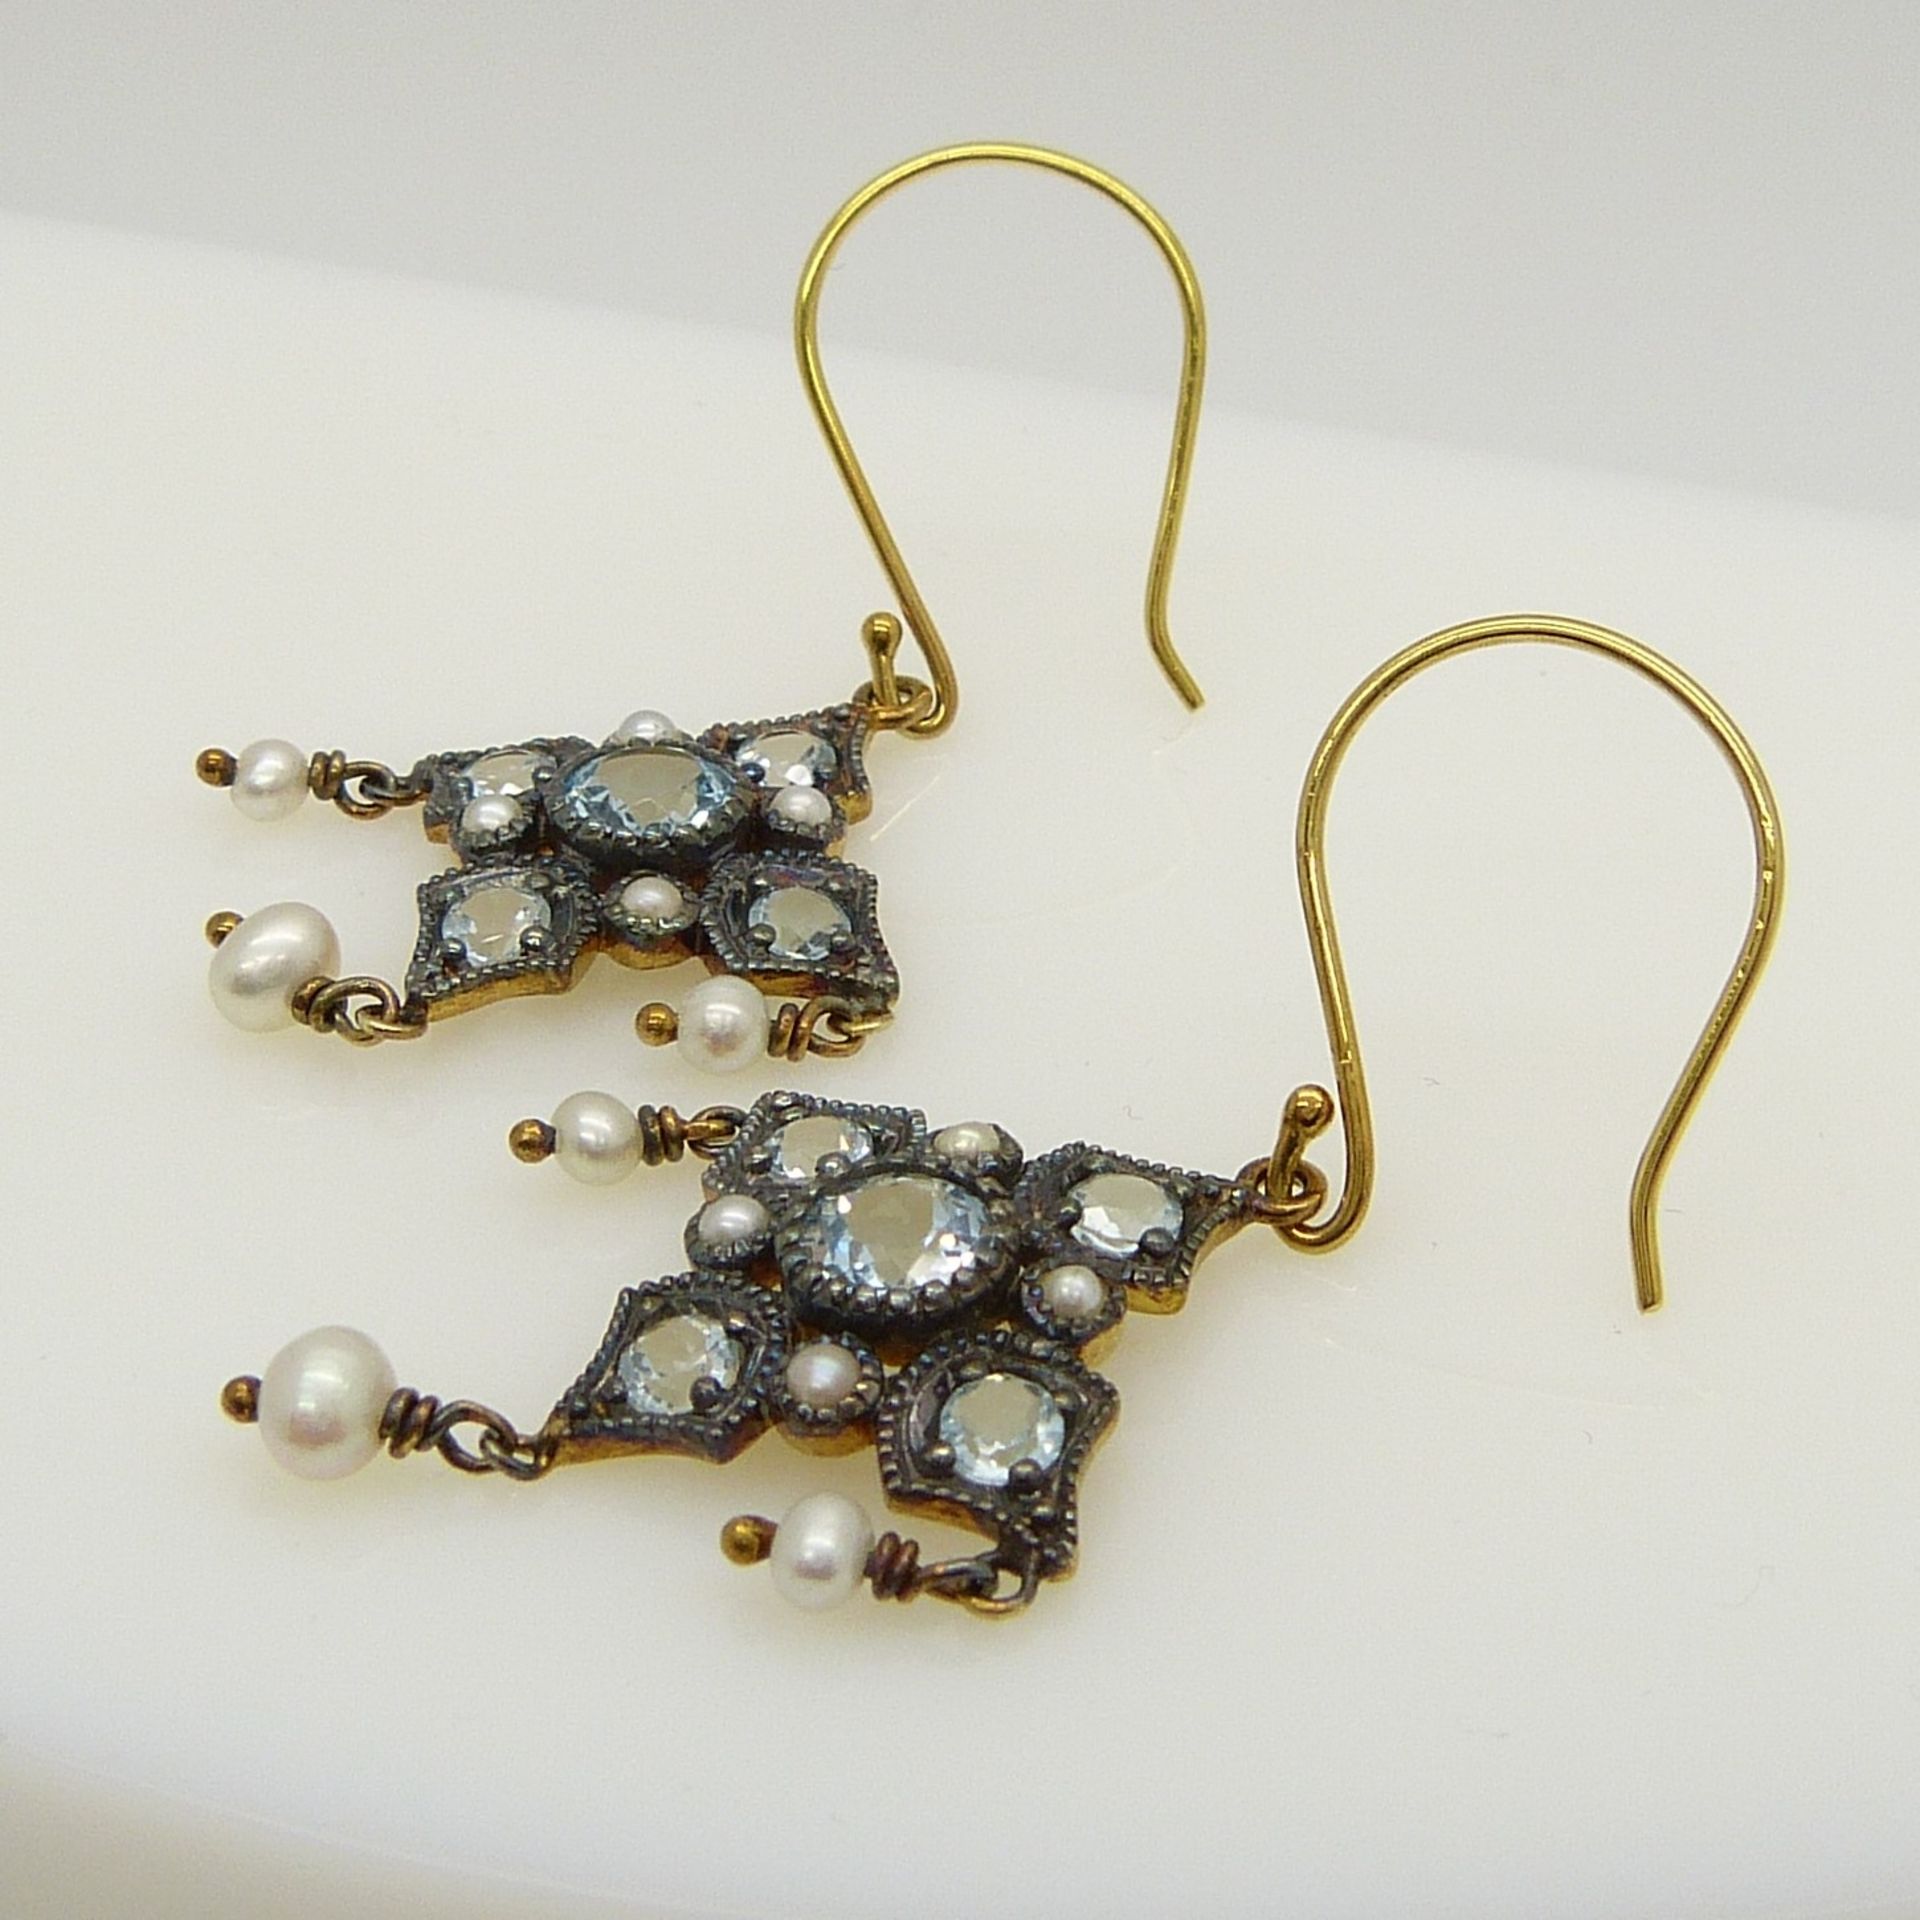 Drop earrings set with blue topaz, pearls and seed pearls in an Edwardian style, with stylish box - Image 4 of 5